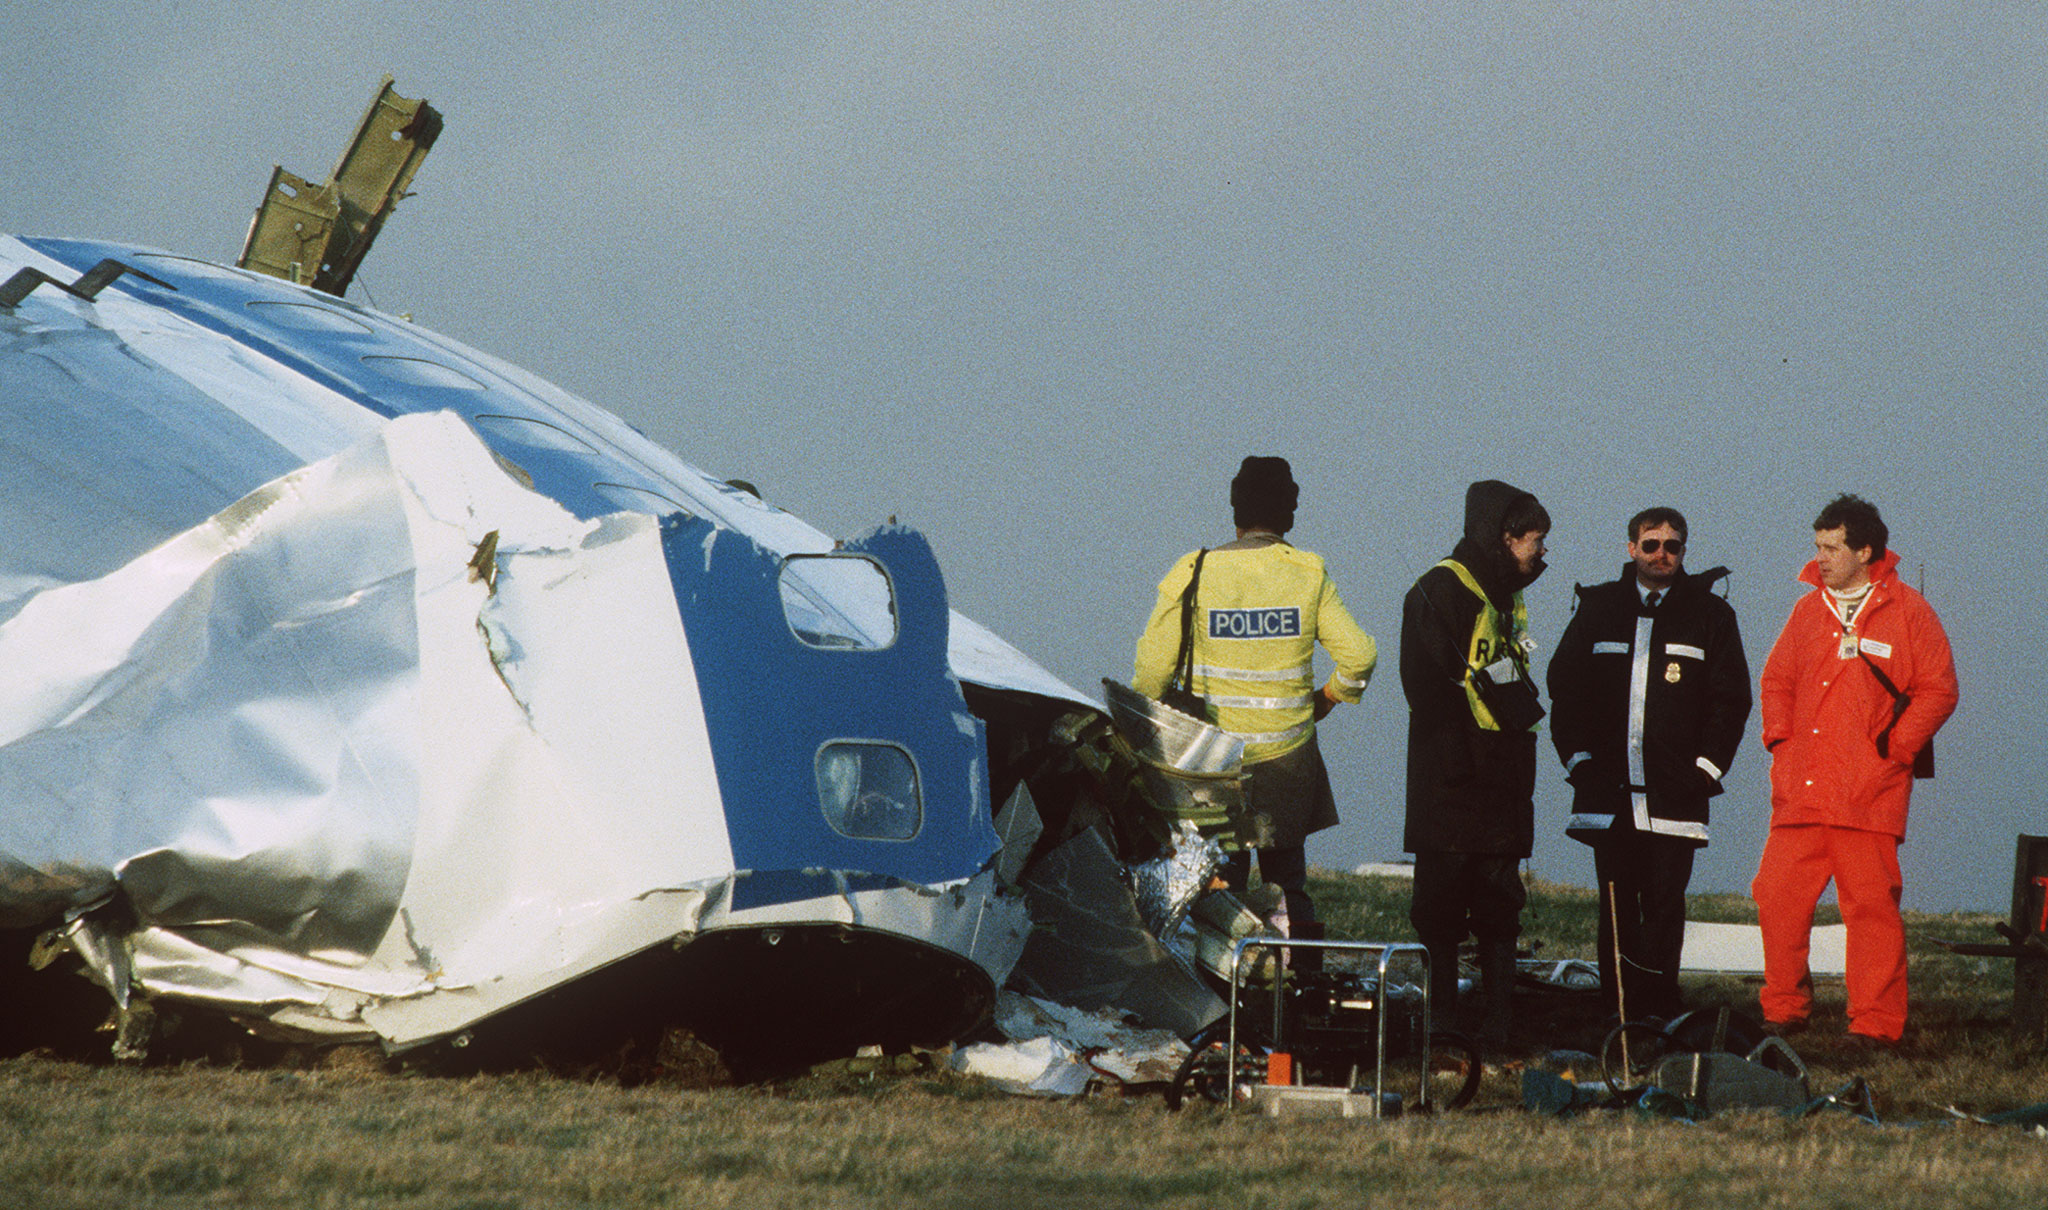 Scottish rescue workers and crash investigators search the area following the bombing of Pan Am flight 103 over Lockerbie in Scotland. Photo: Reuters